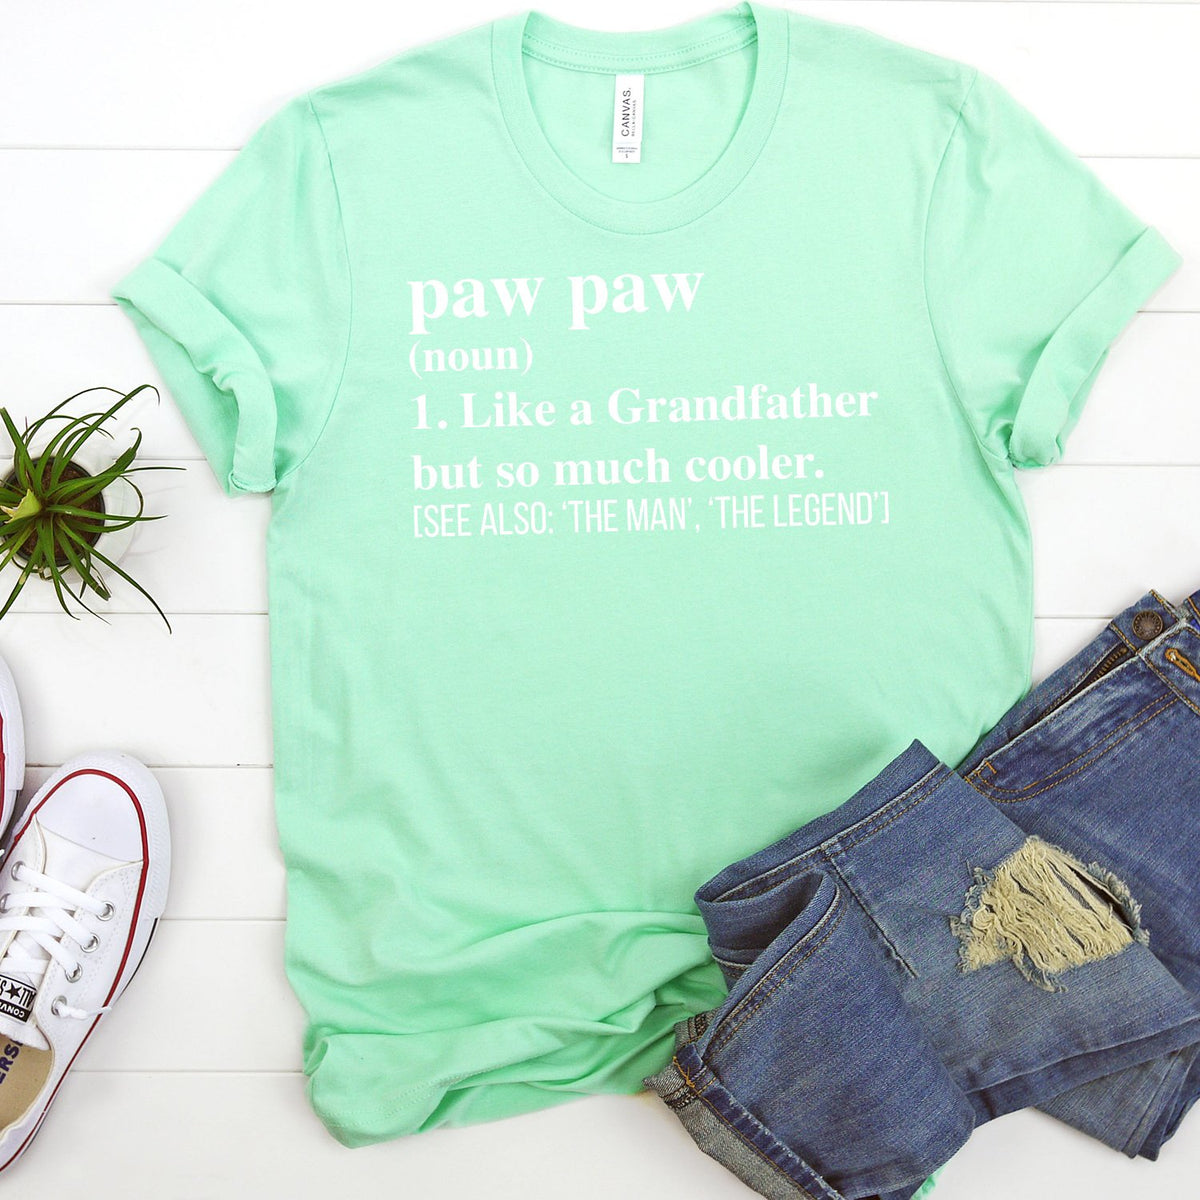 Paw Paw (Noun) 1. Like A Grandfather But So Much Cooler - Short Sleeve Tee Shirt